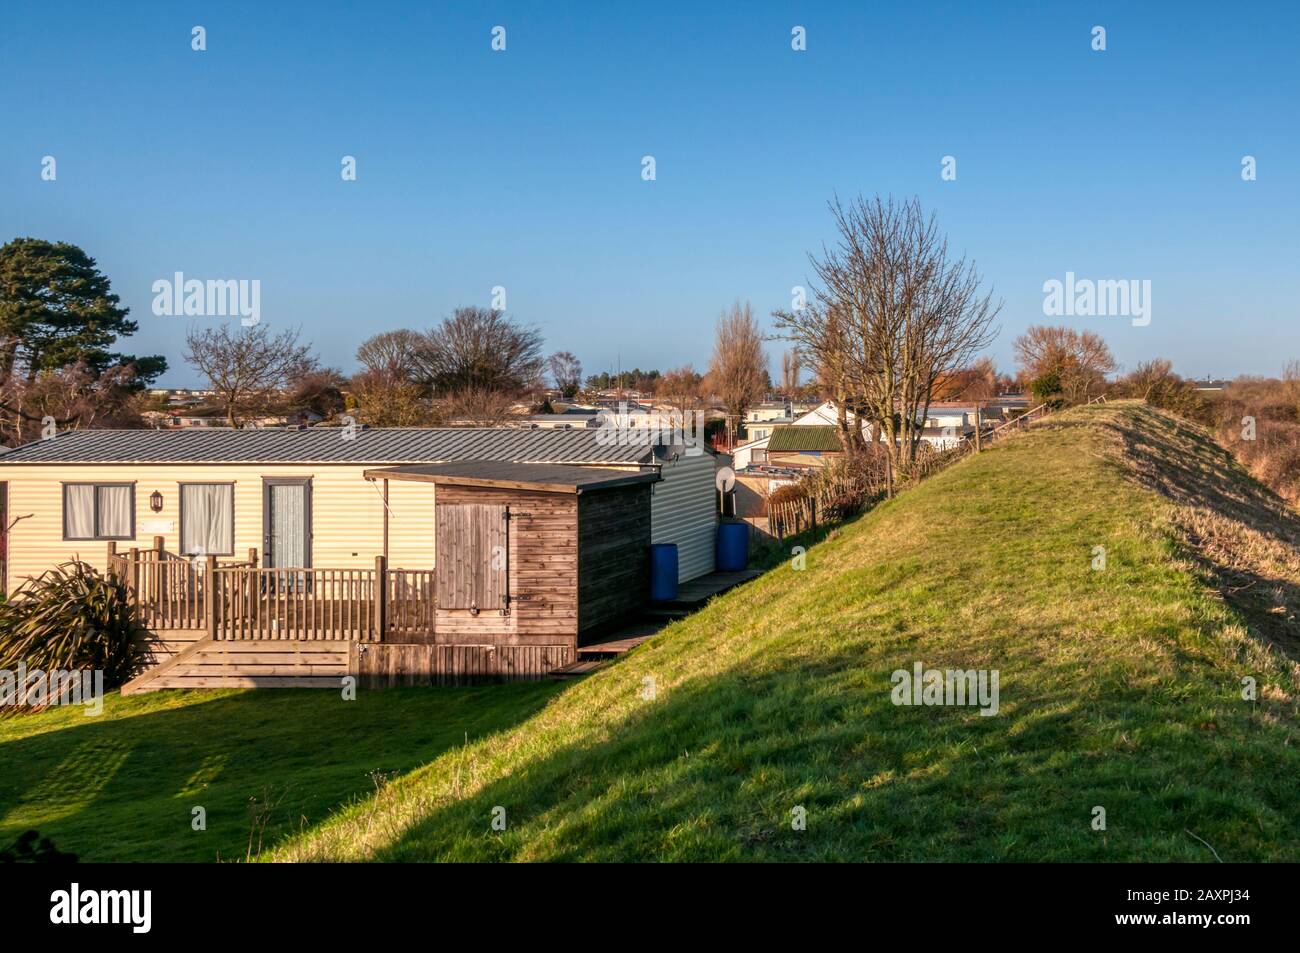 Caravans and holiday homes on the seaward side of the sea wall flood defence at Snettisham on the east coast of The Wash, Norfolk. Stock Photo